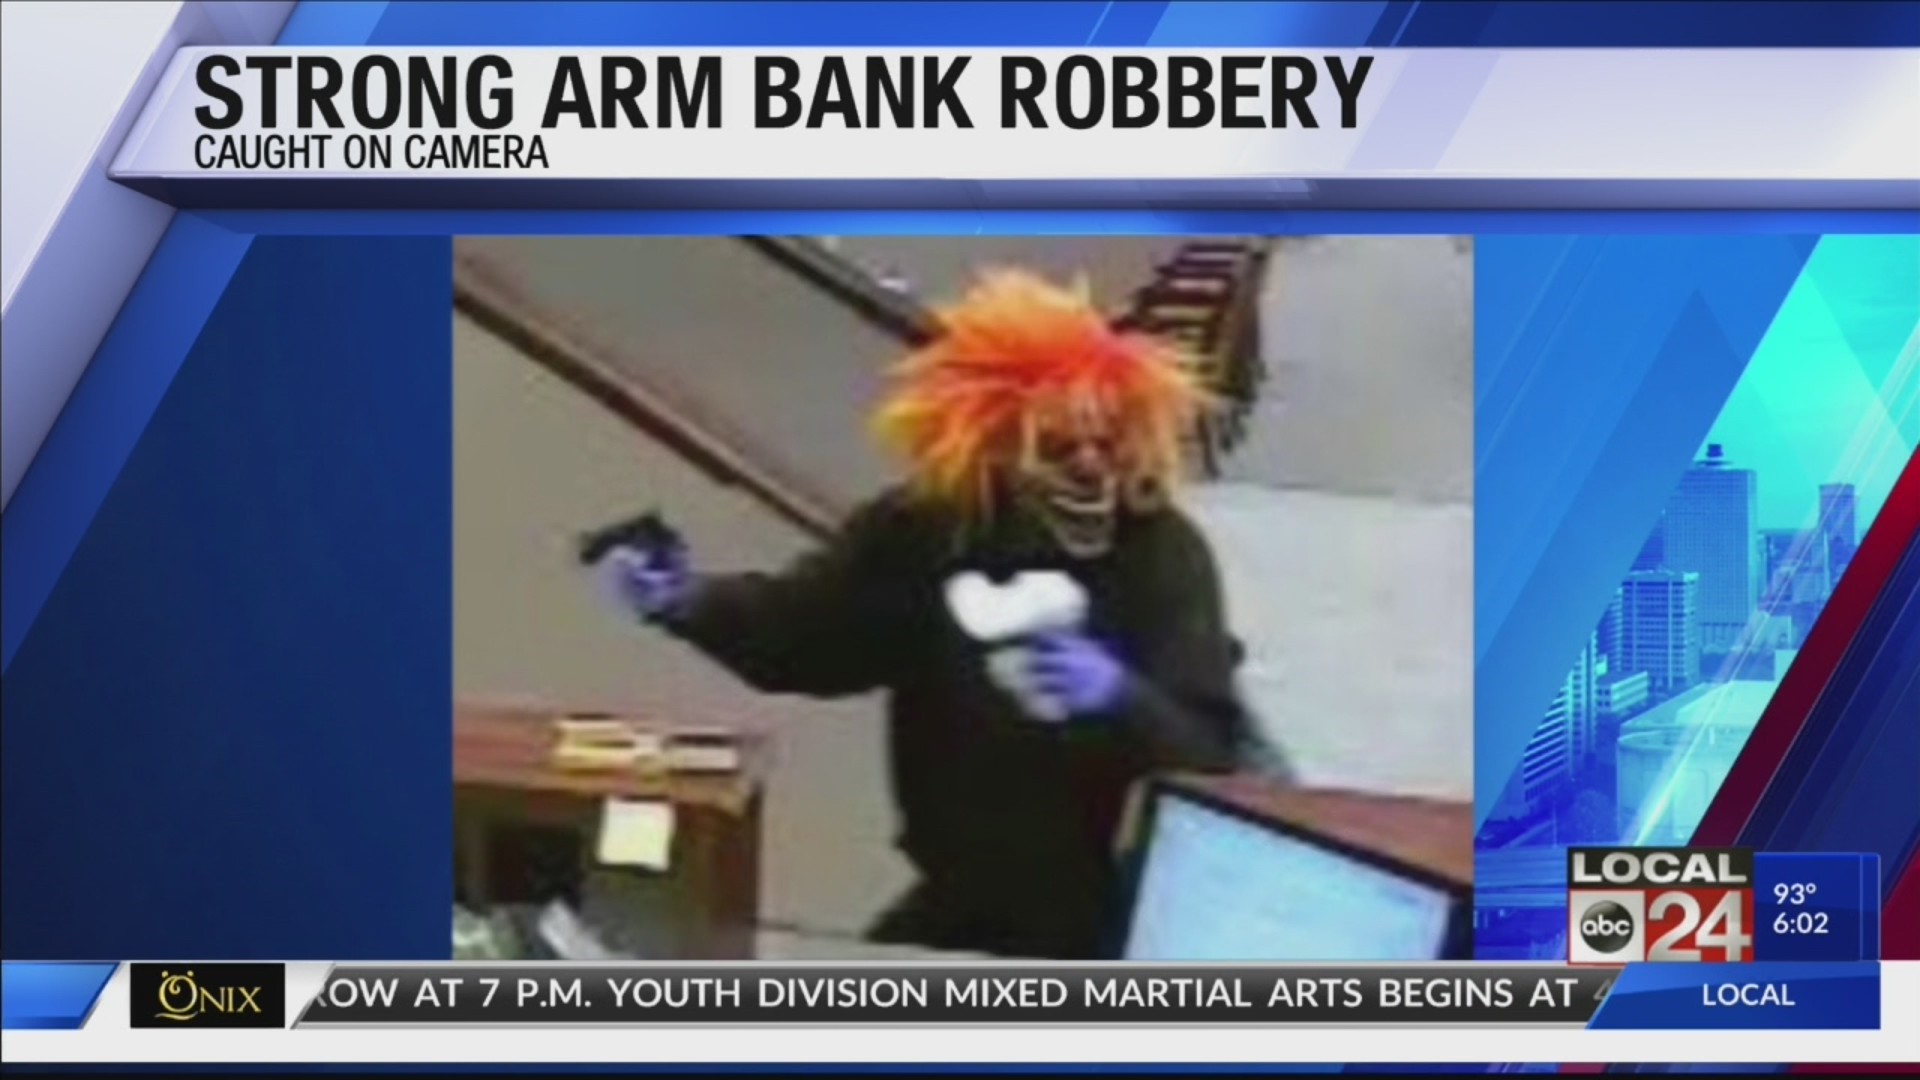 Bank robber wears scary clown mask